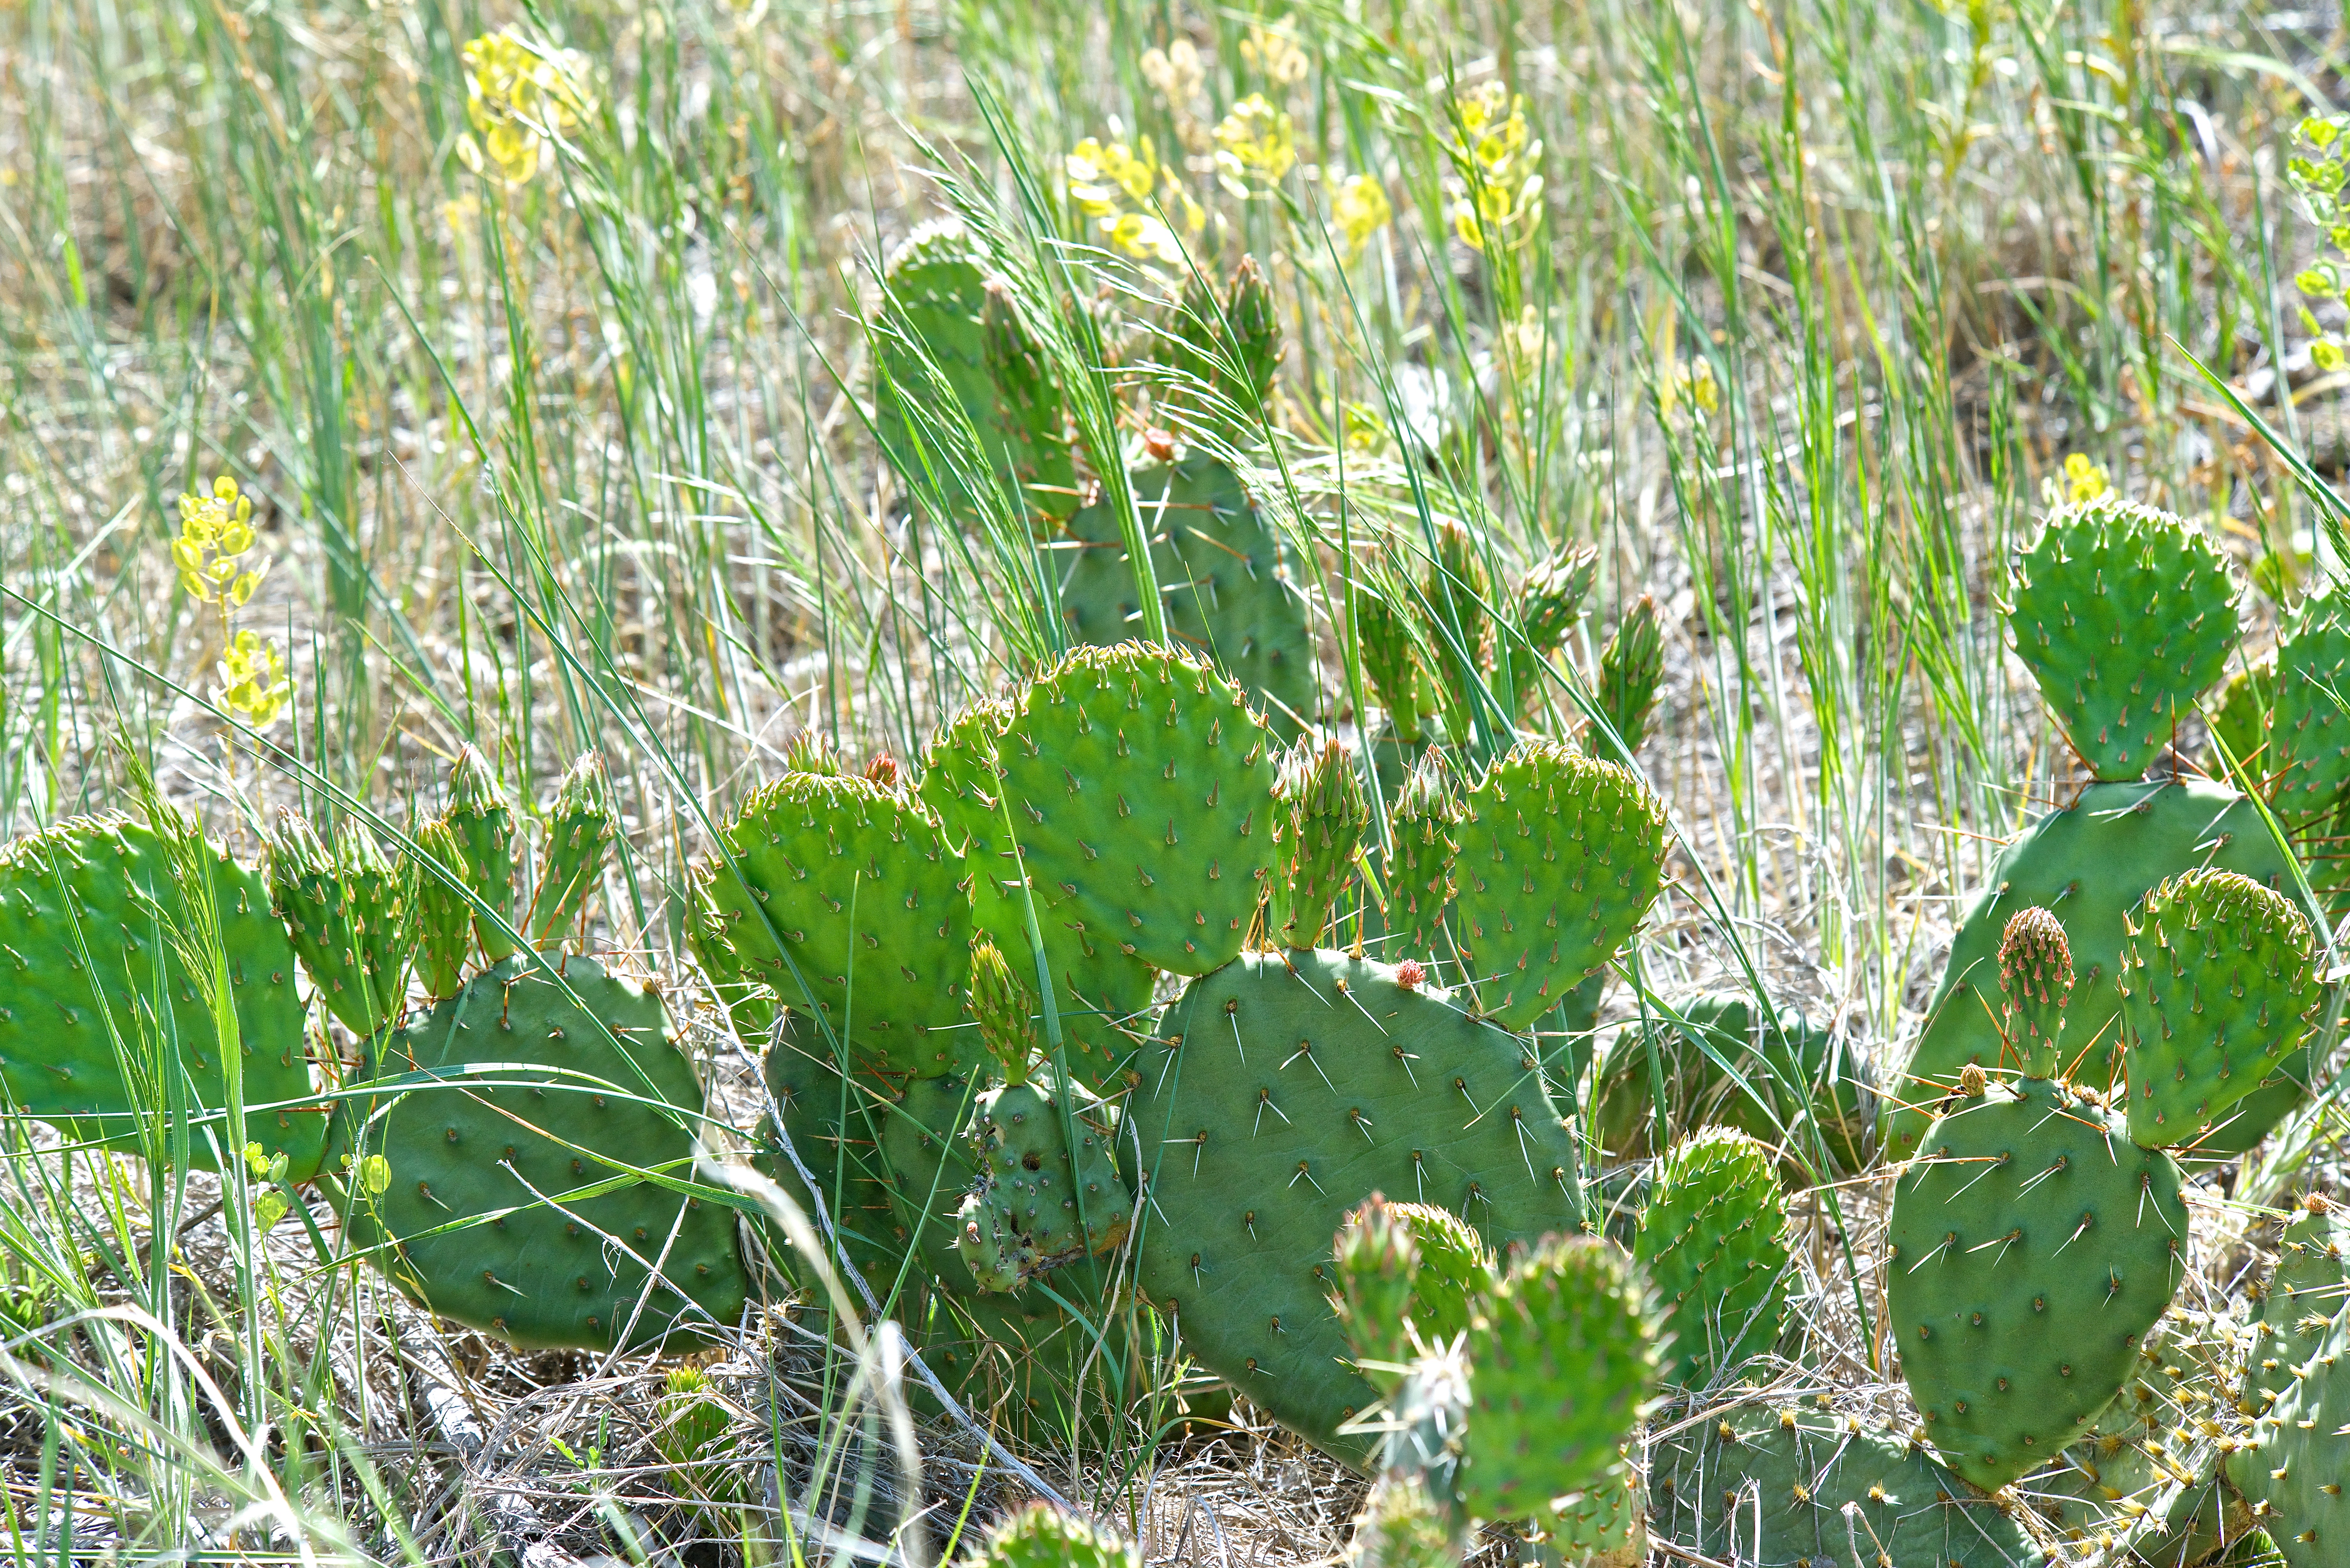 Opuntia at the River